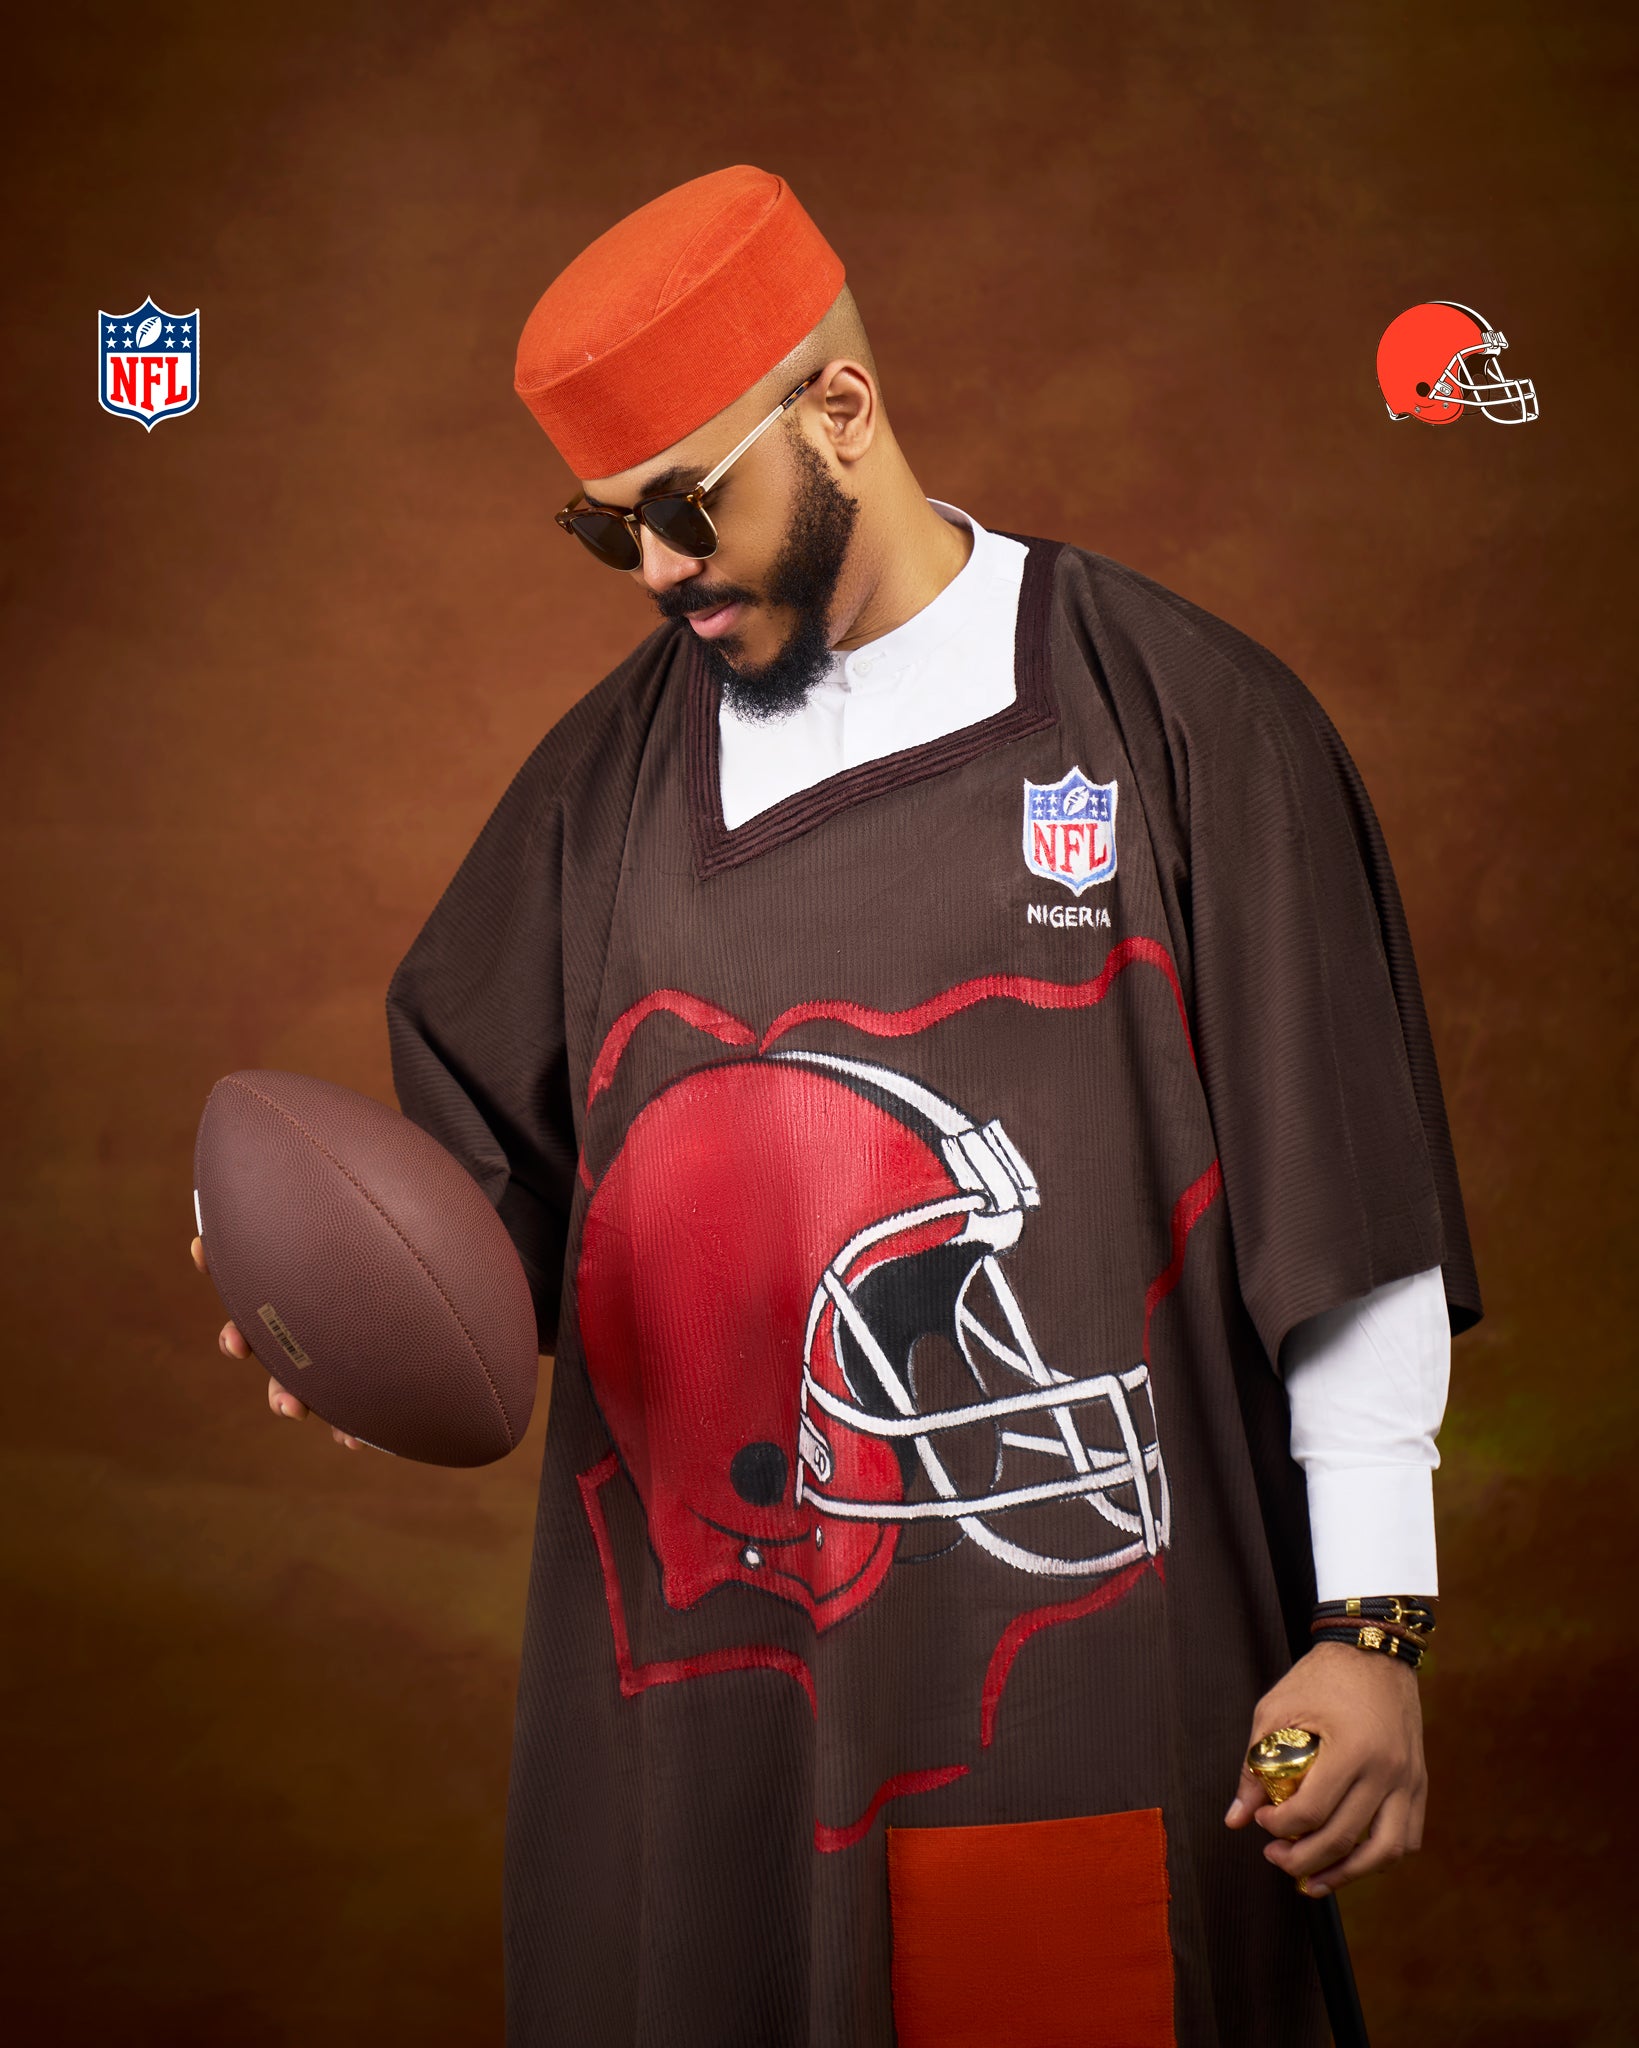 Ozo-Chukwu Makes History: Celebrating the First NFL Draft Announcement from Nigeria with a Limited-Edition Agbada